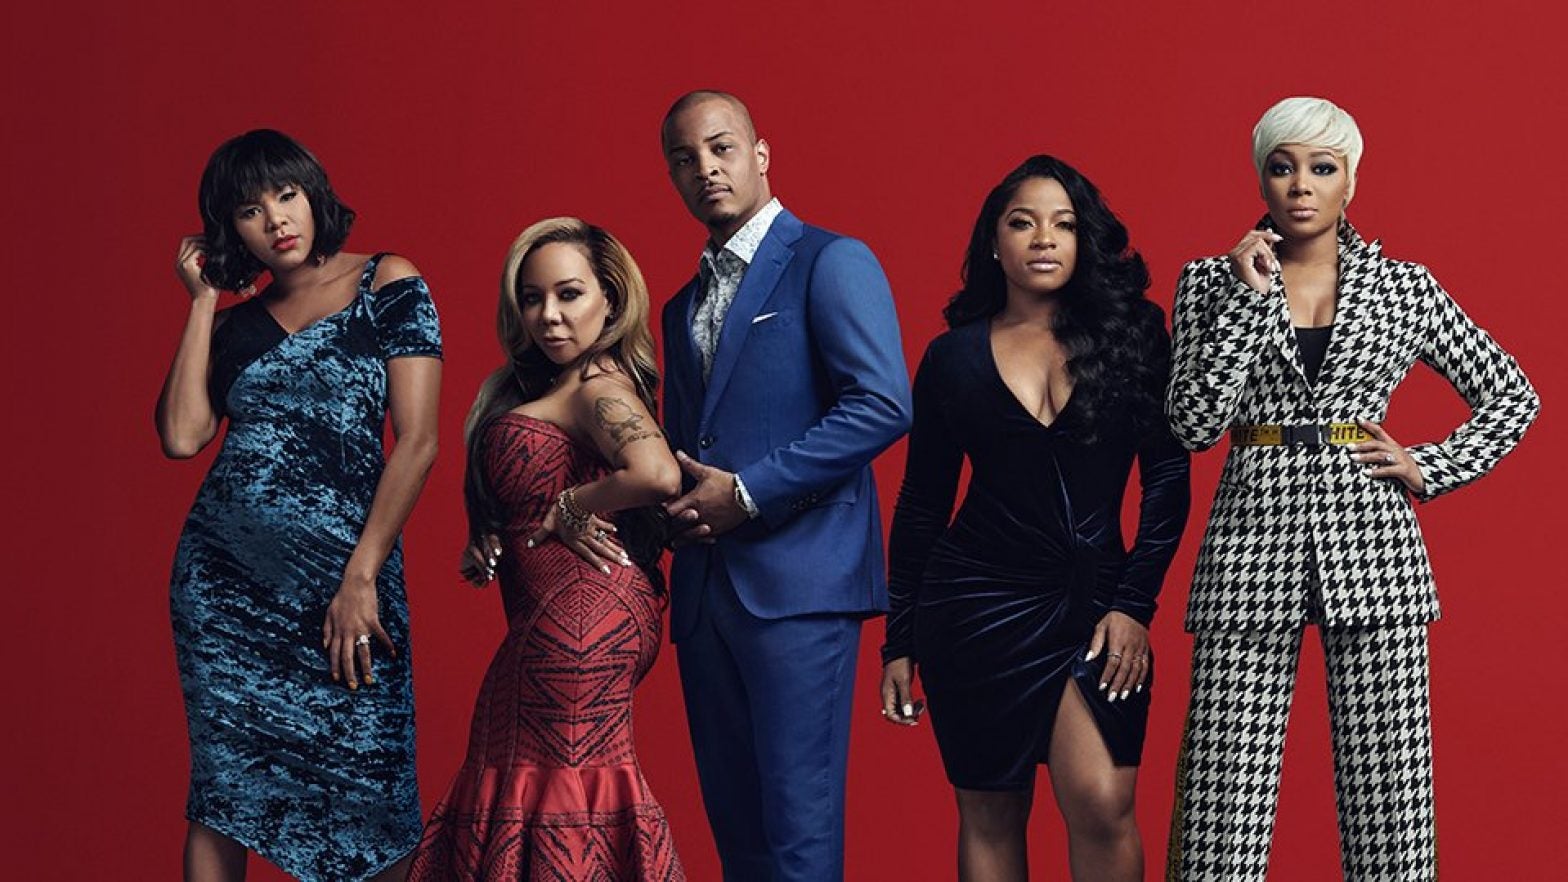 'T.I. & Tiny: Friends & Family Hustle' Halts Production Following Sexual Abuse Allegations